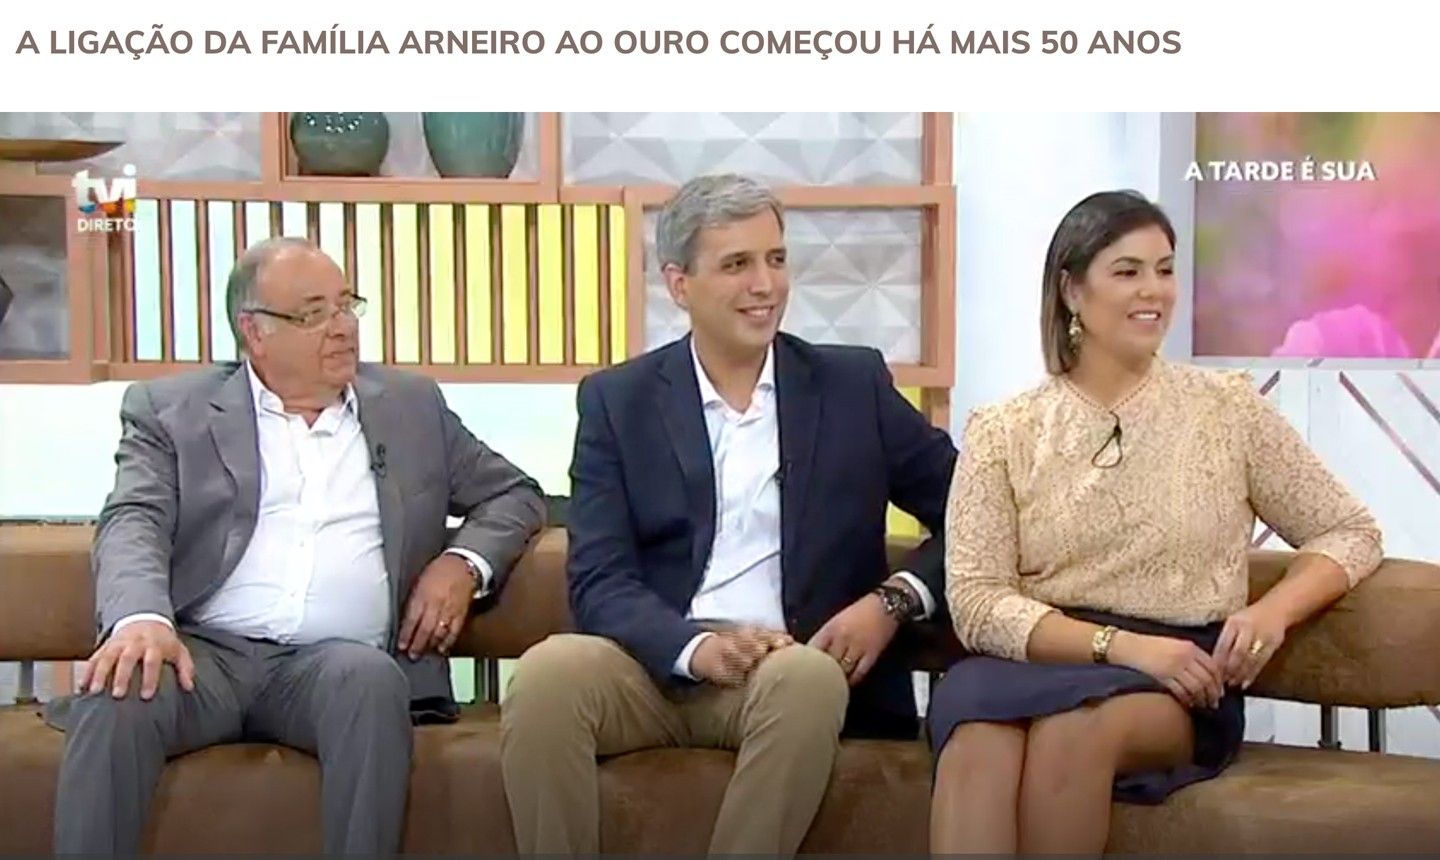 THE ARNEIRO FAMILYS CONNECTION TO GOLD BEGAN 50 YEARS AGO